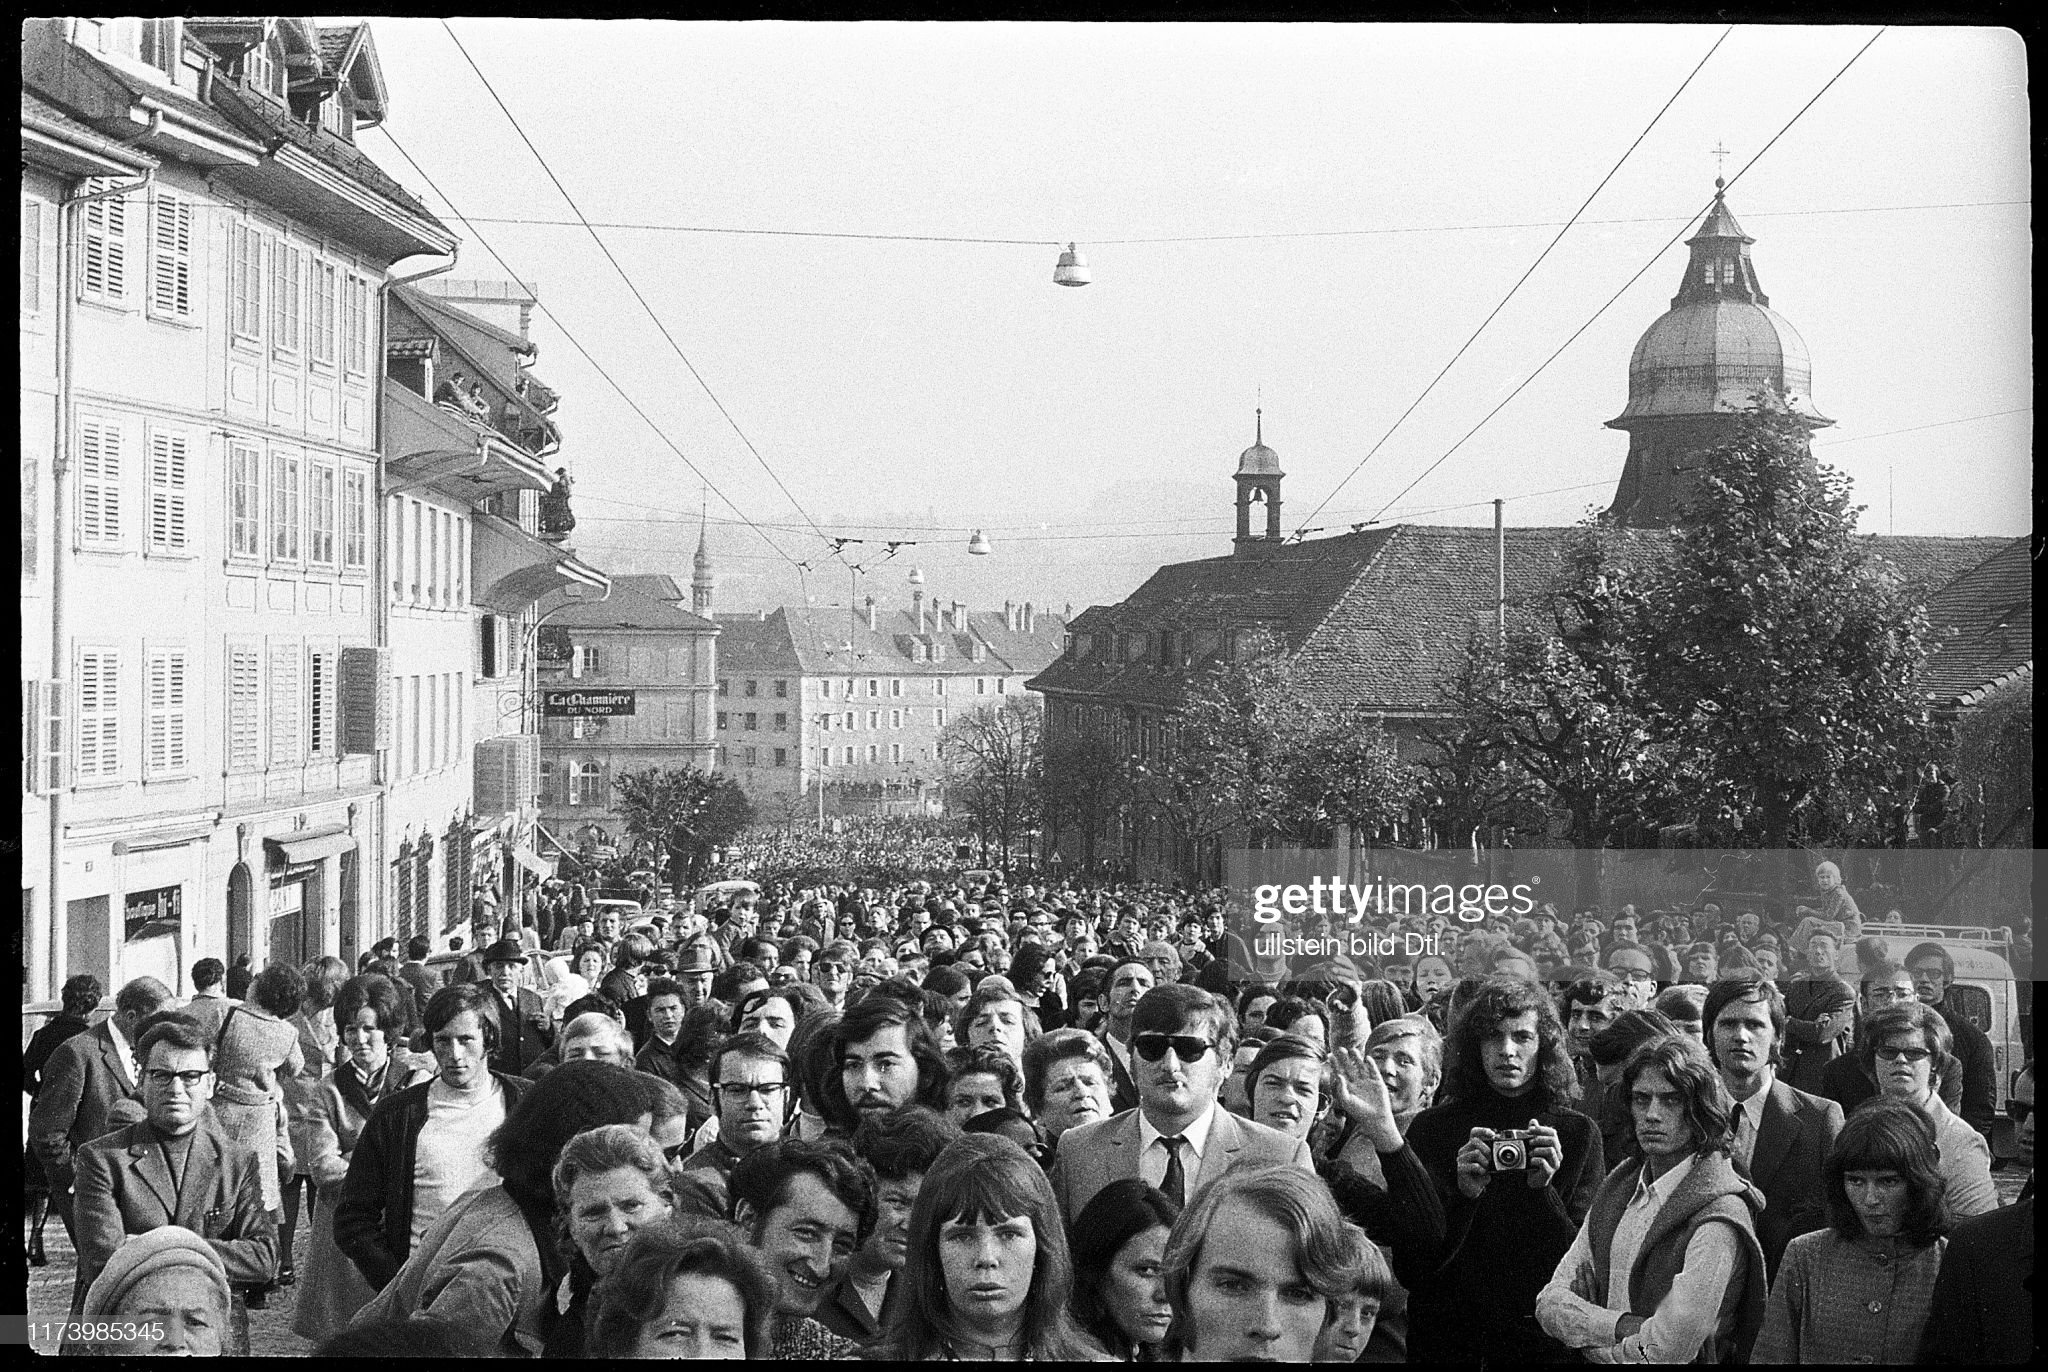 Jo Siffert's funeral, Fribourg 1971.